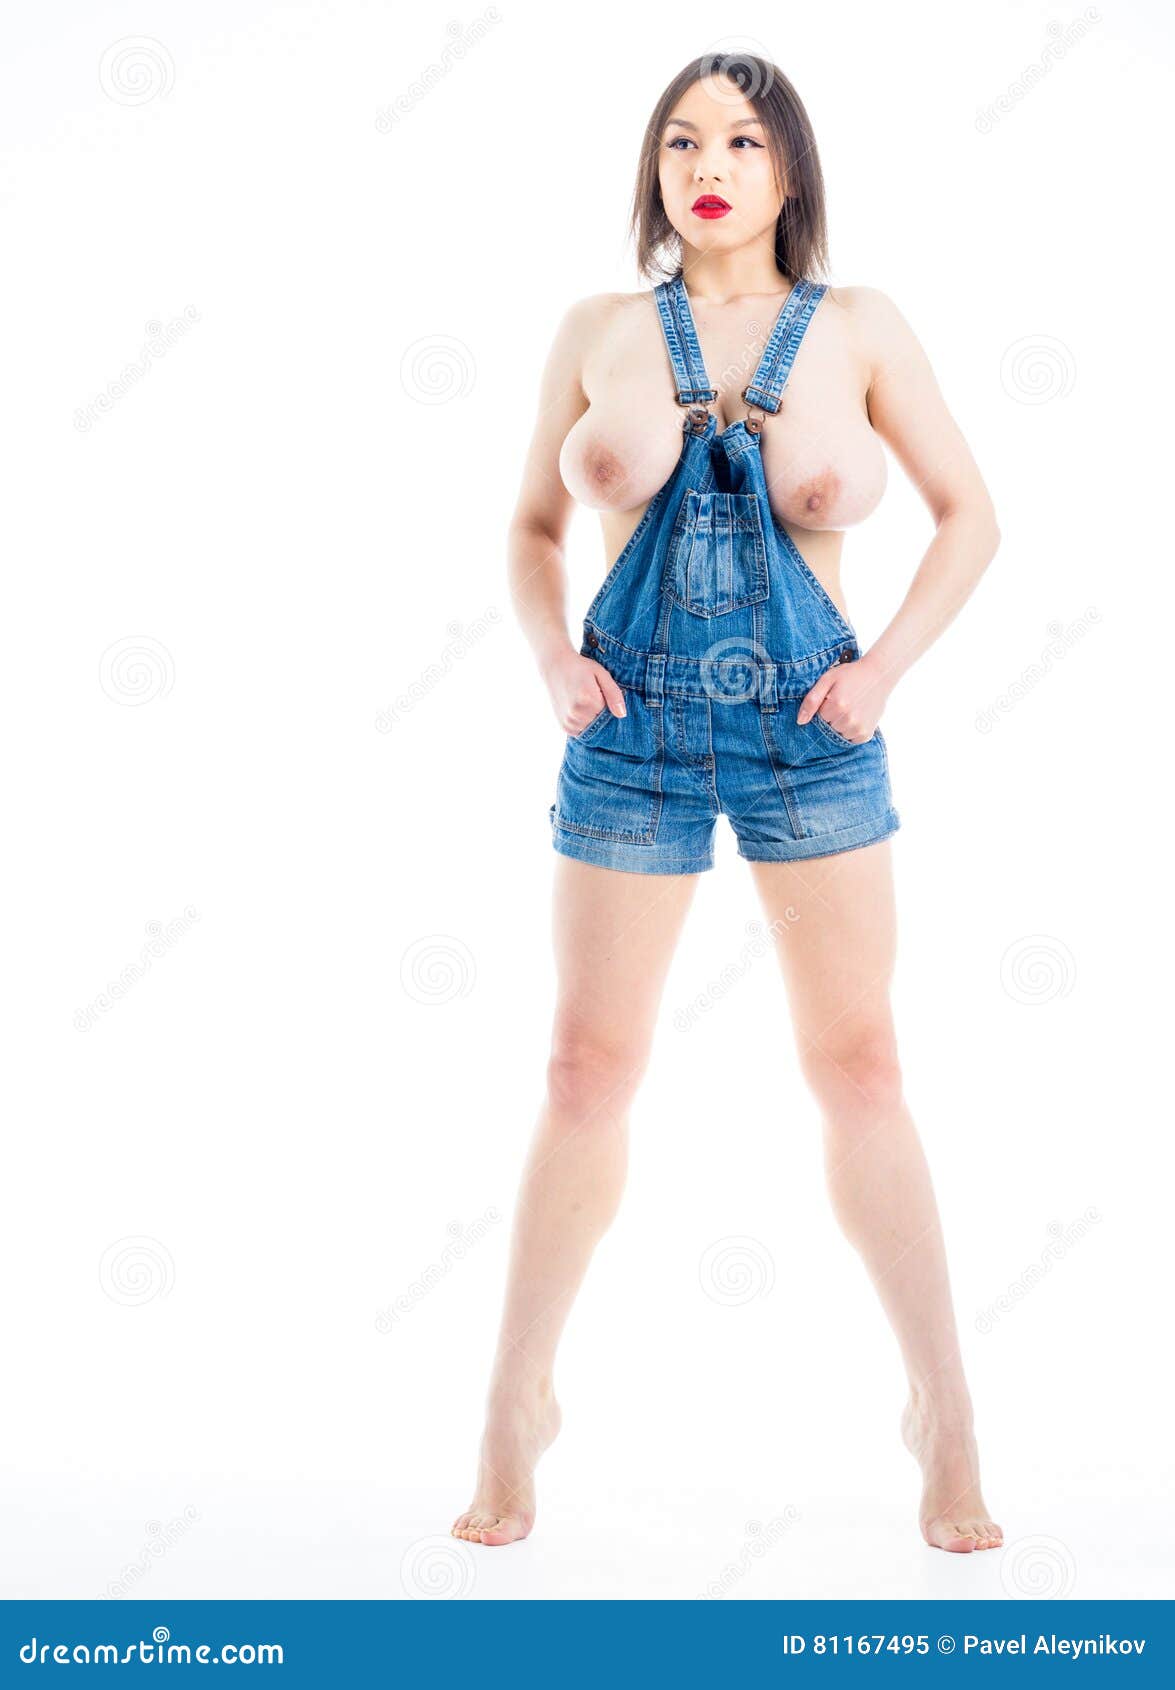 Nude in overalls